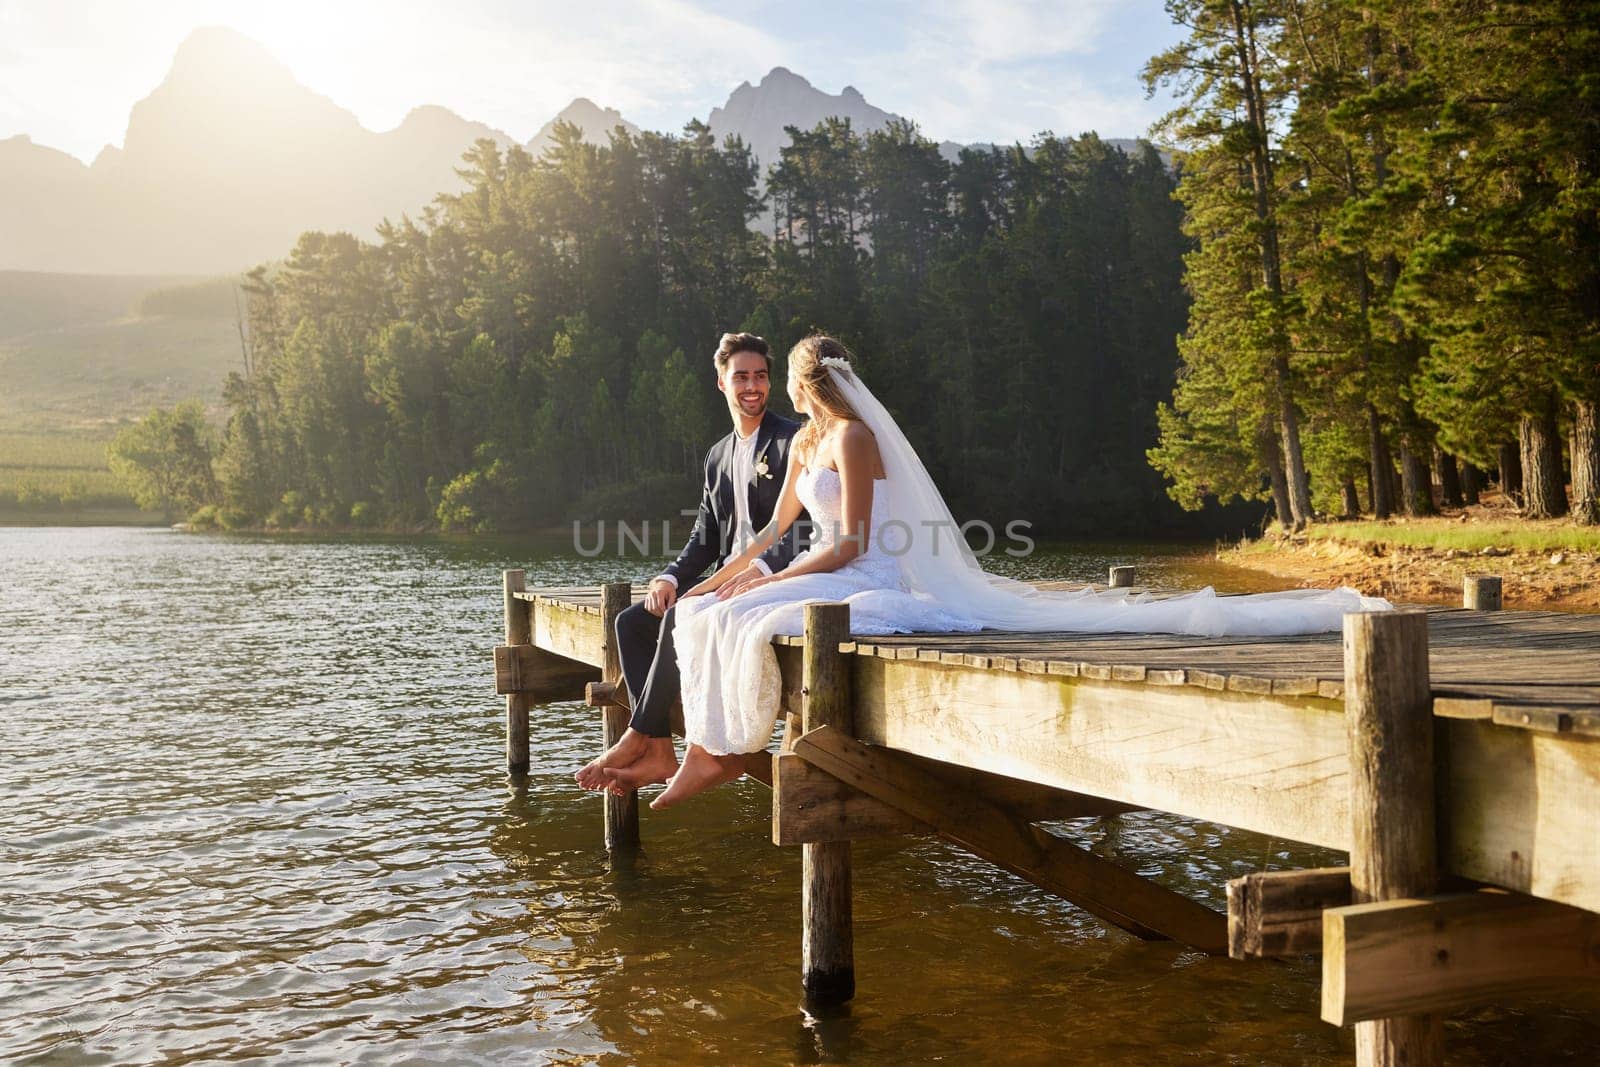 Forest, lake and a married couple on a pier in celebration together after a wedding ceremony of tradition. Marriage, love or romance with a bride and groom sitting outdoor while bonding in nature by YuriArcurs